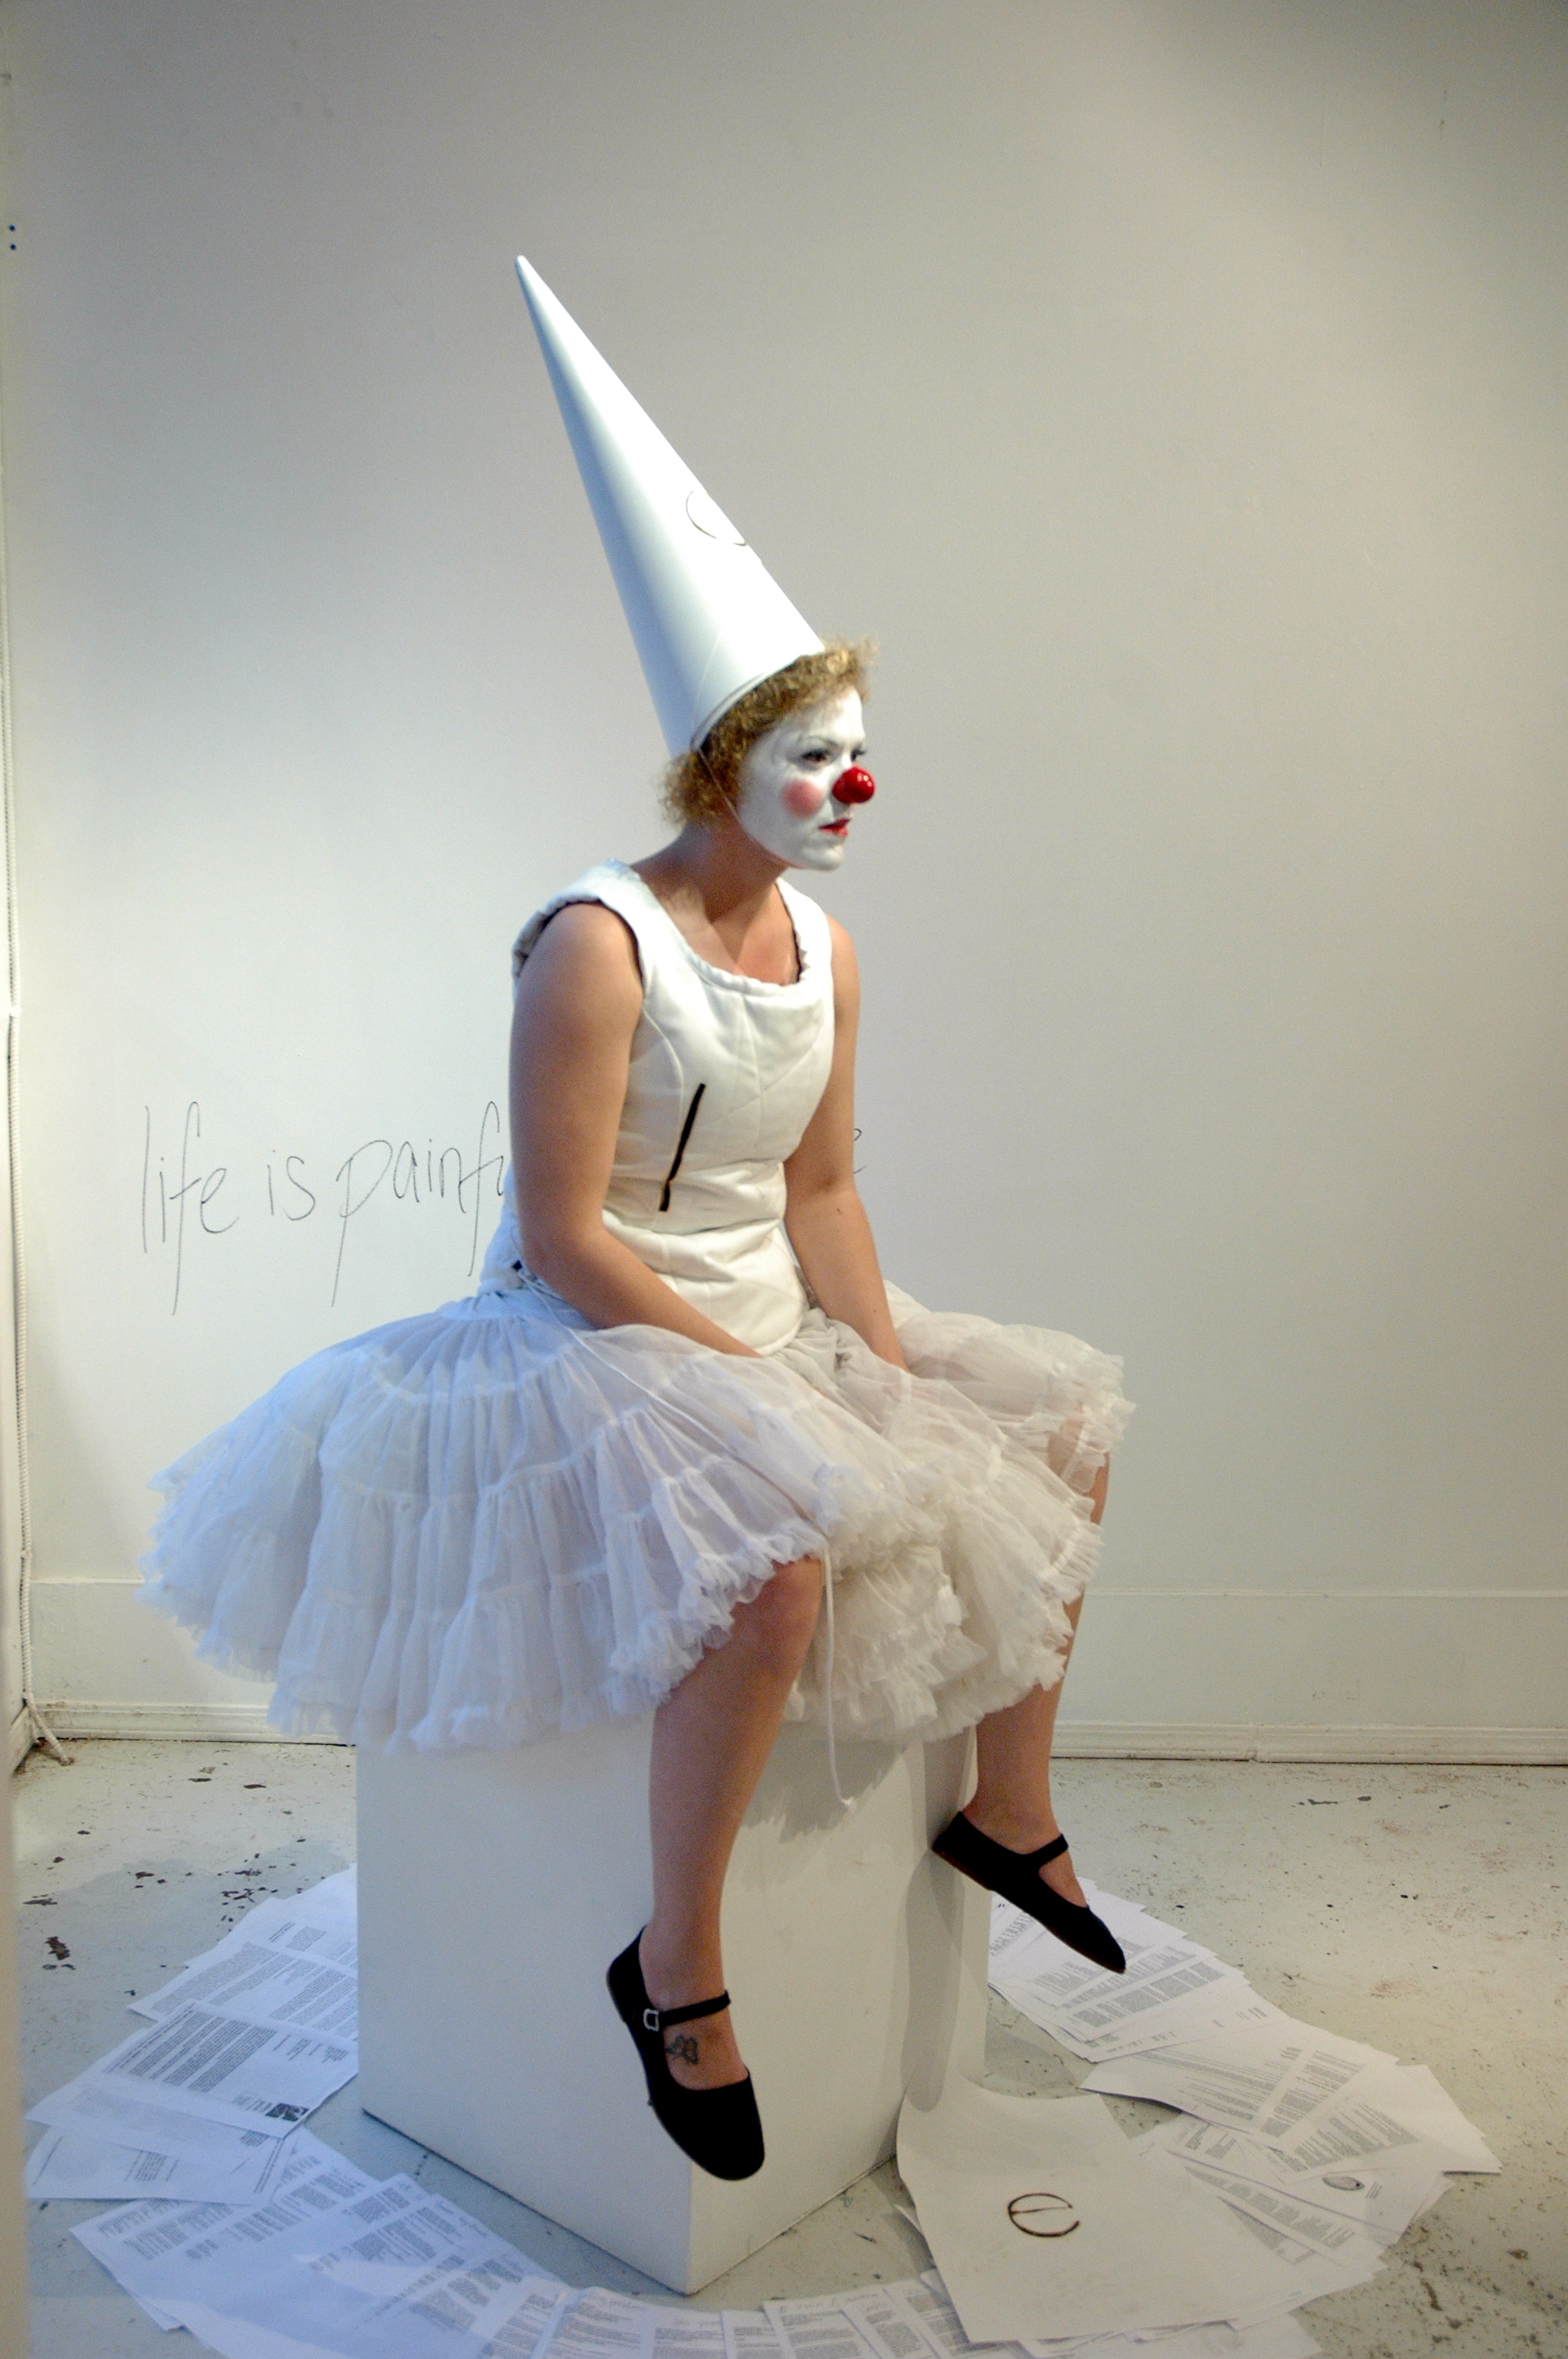 performance artist and master clown S. Siobhan McCarthy as Blyss in altered states